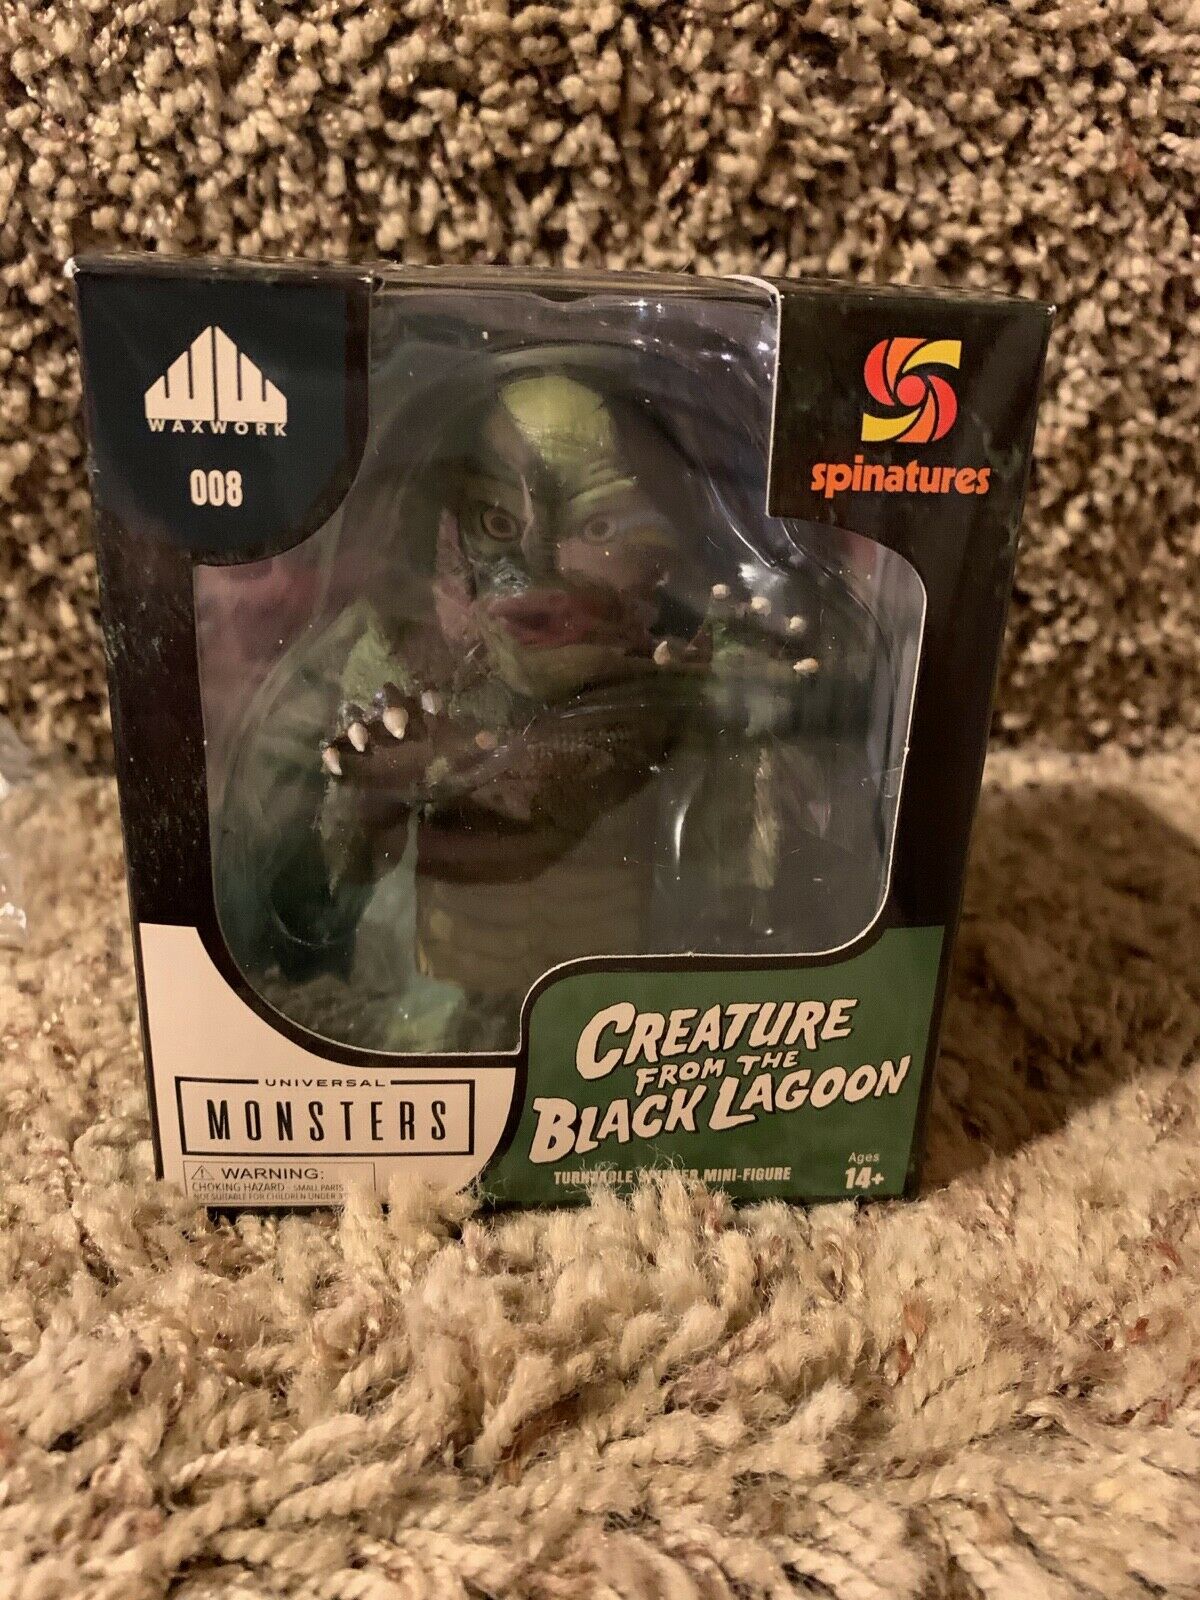 Creature From The Black Lagoon Spinature Vinyl Record Lp Spinner